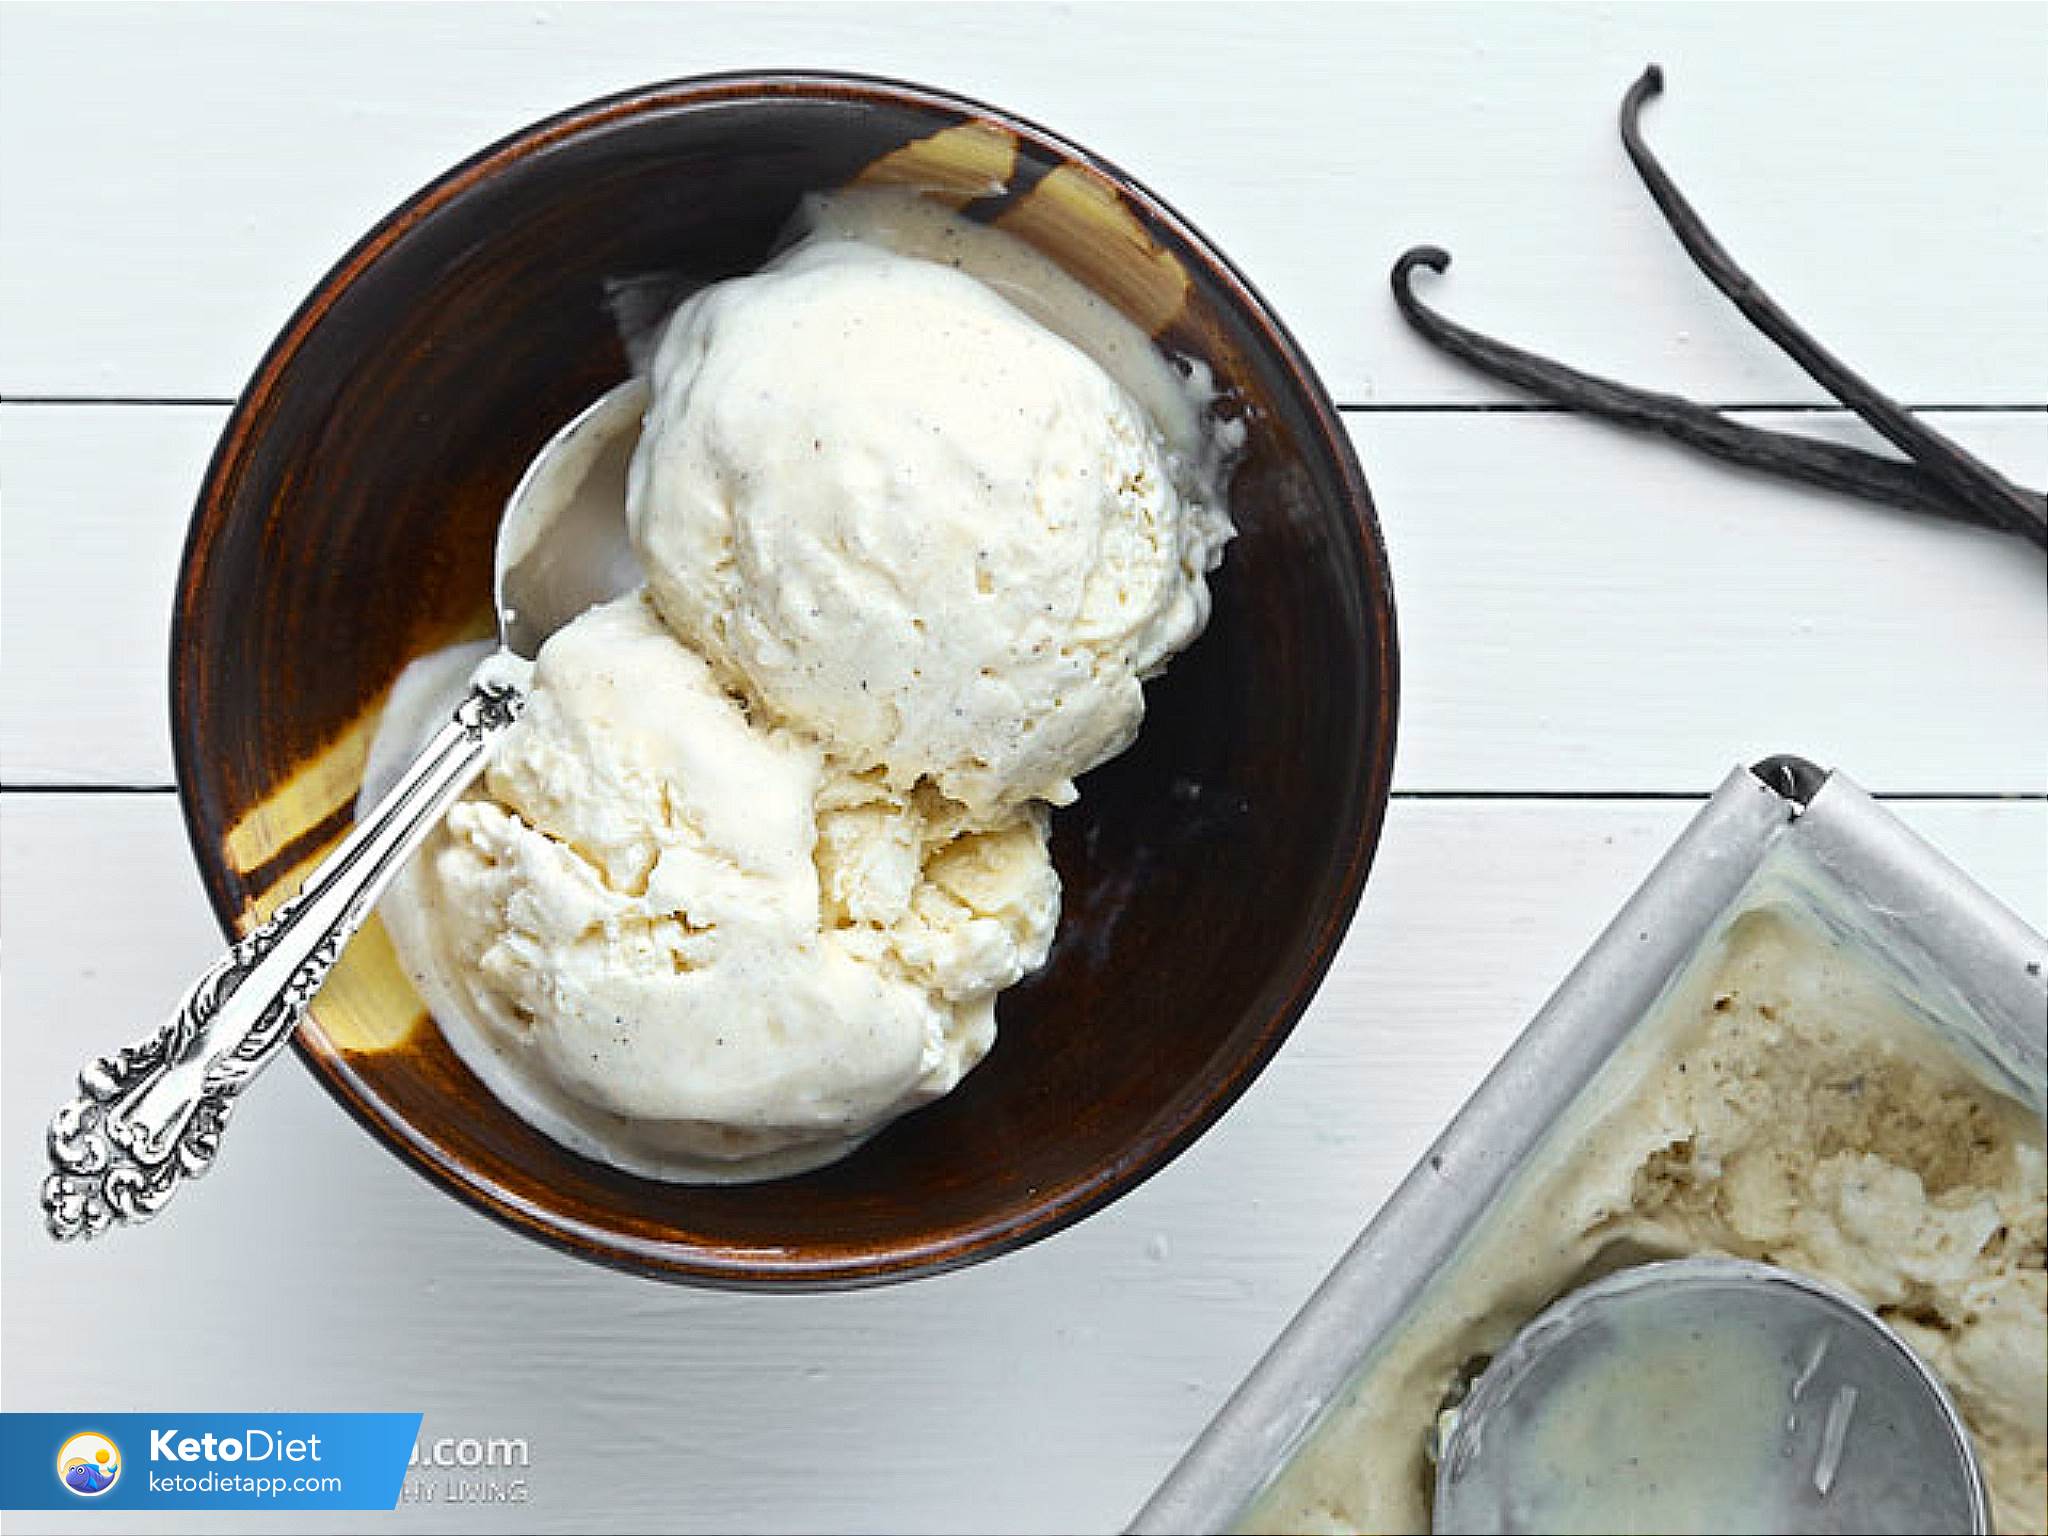 Homemade Vanilla Ice Cream Without Eggs - Cooking With Carlee